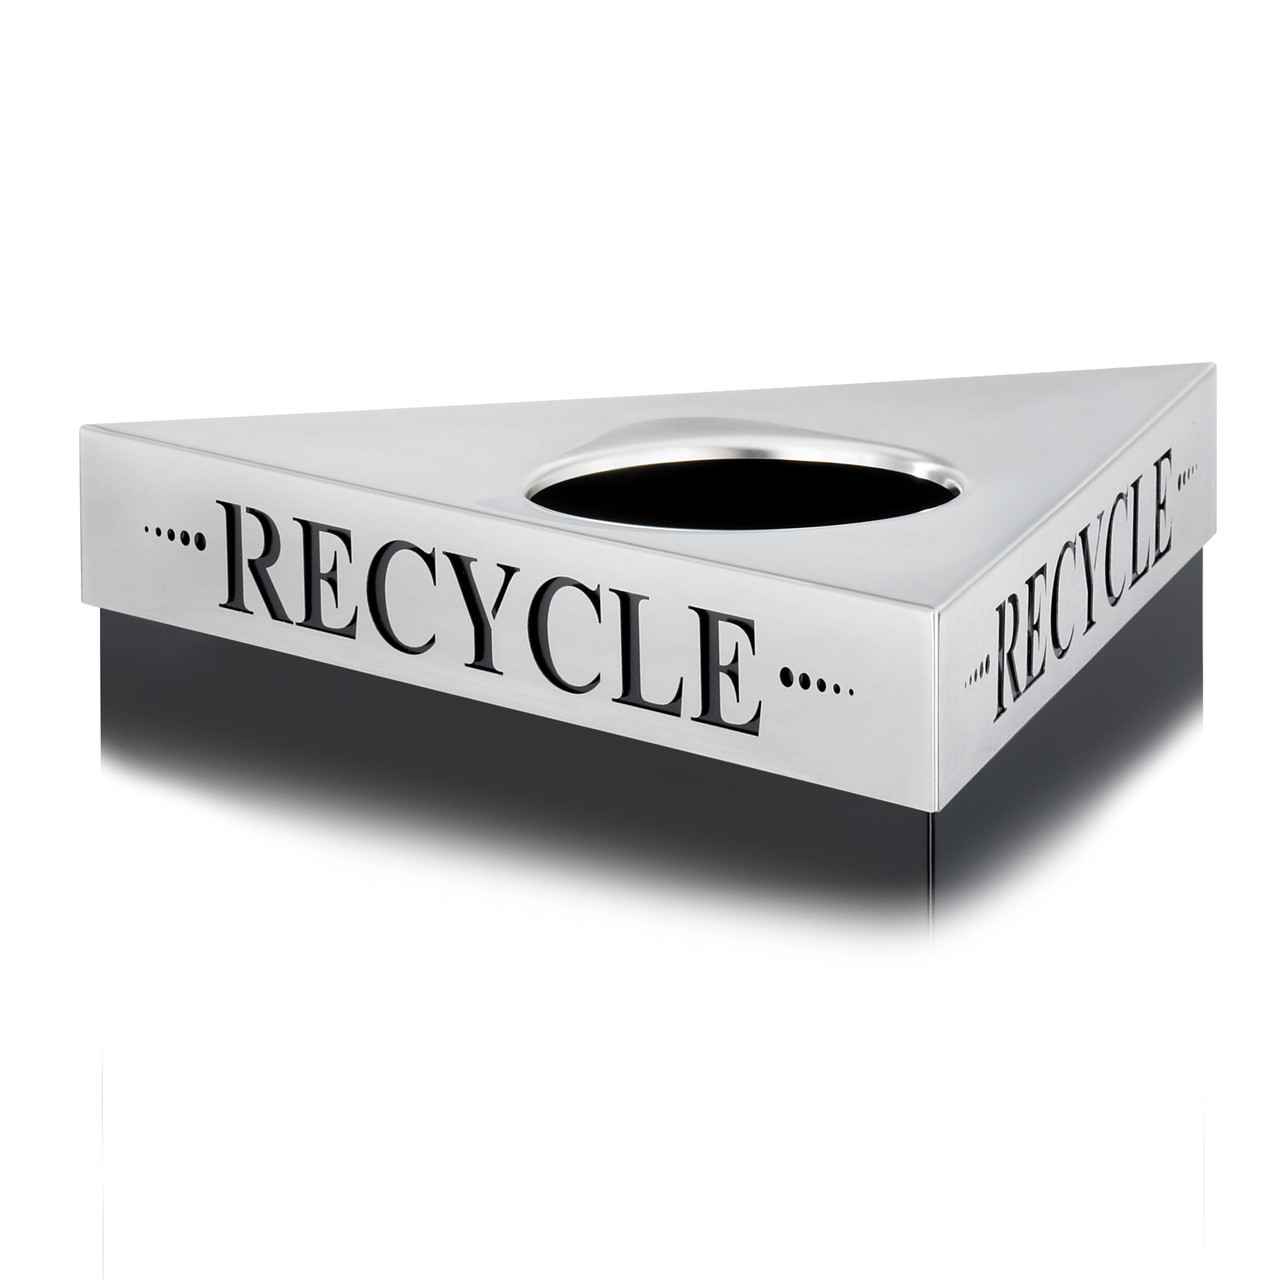 Trifecta "Recycle" Lid